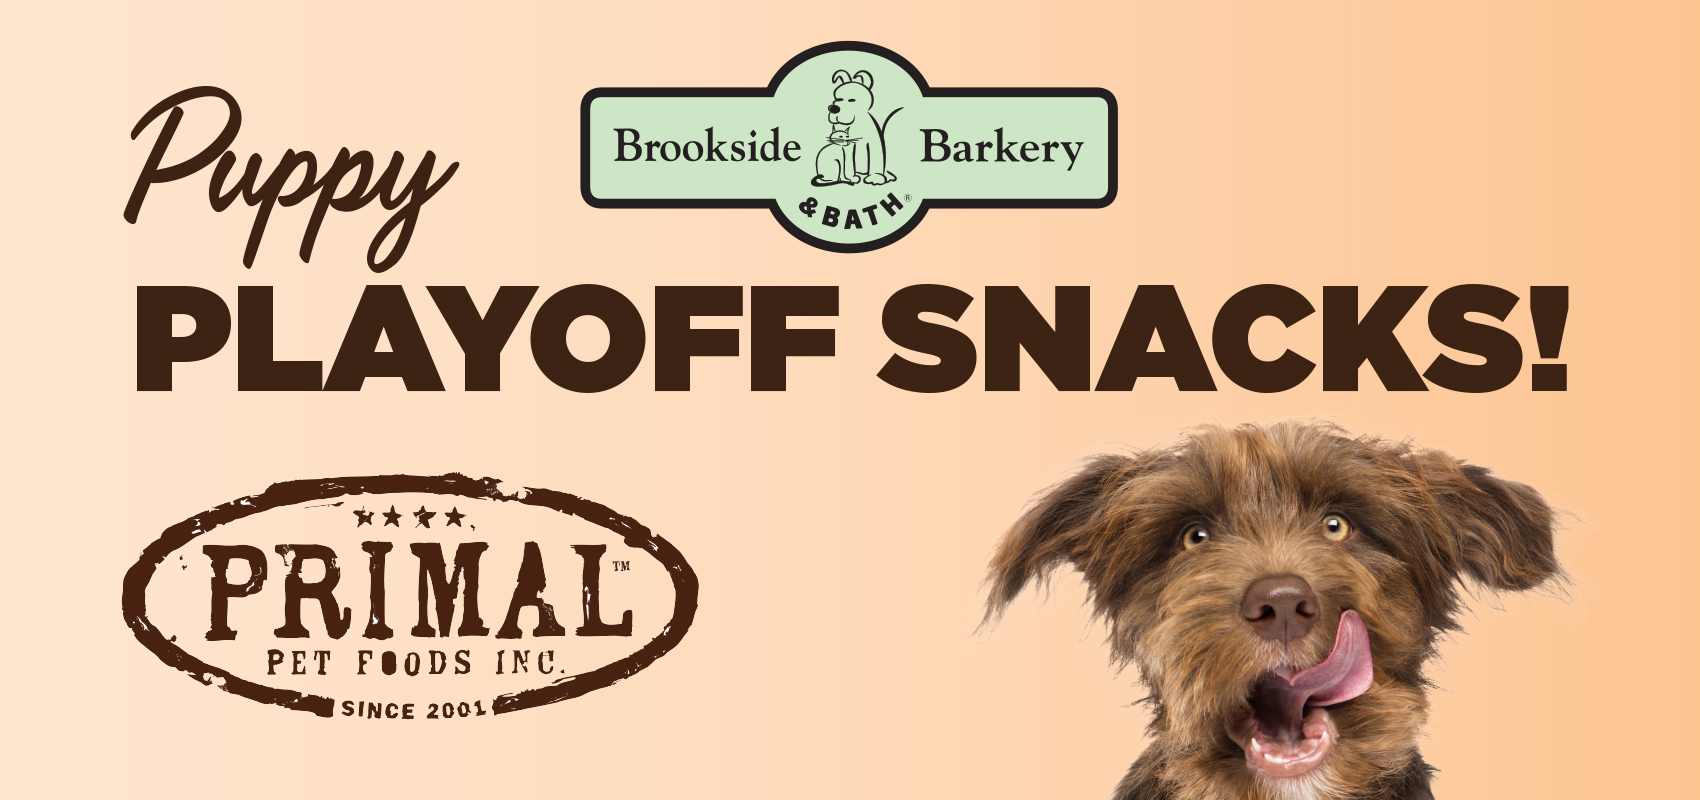 Puppy Playoff Snacks with Primal Pet Foods